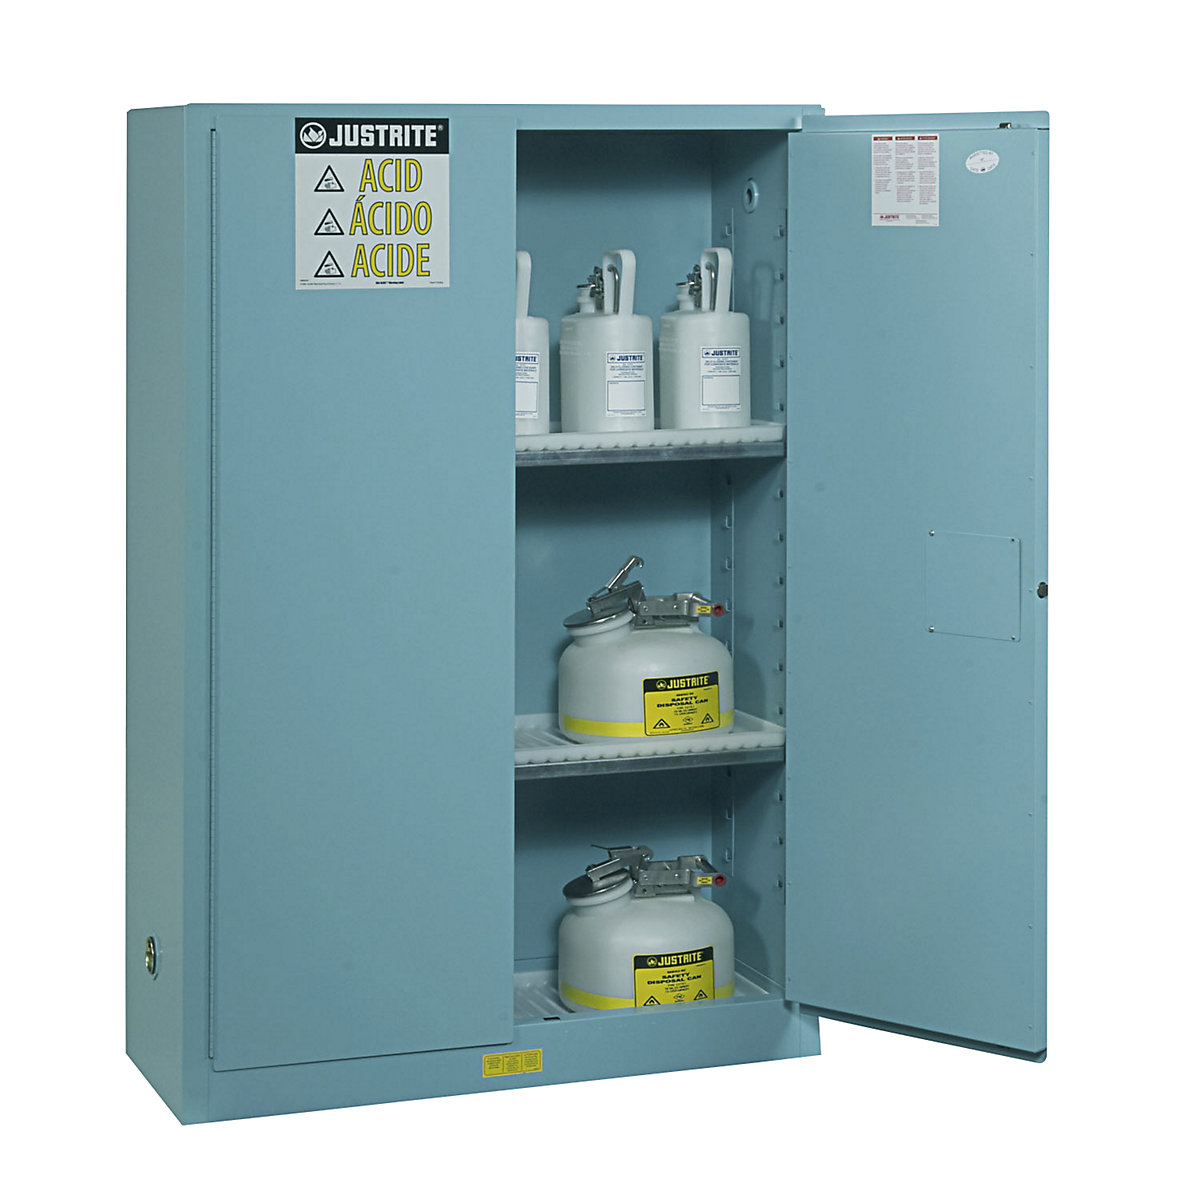 FM safety cupboards – Justrite, HxWxD 1651 x 1092 x 457 mm, manual doors, for acids, alkalis, blue-6